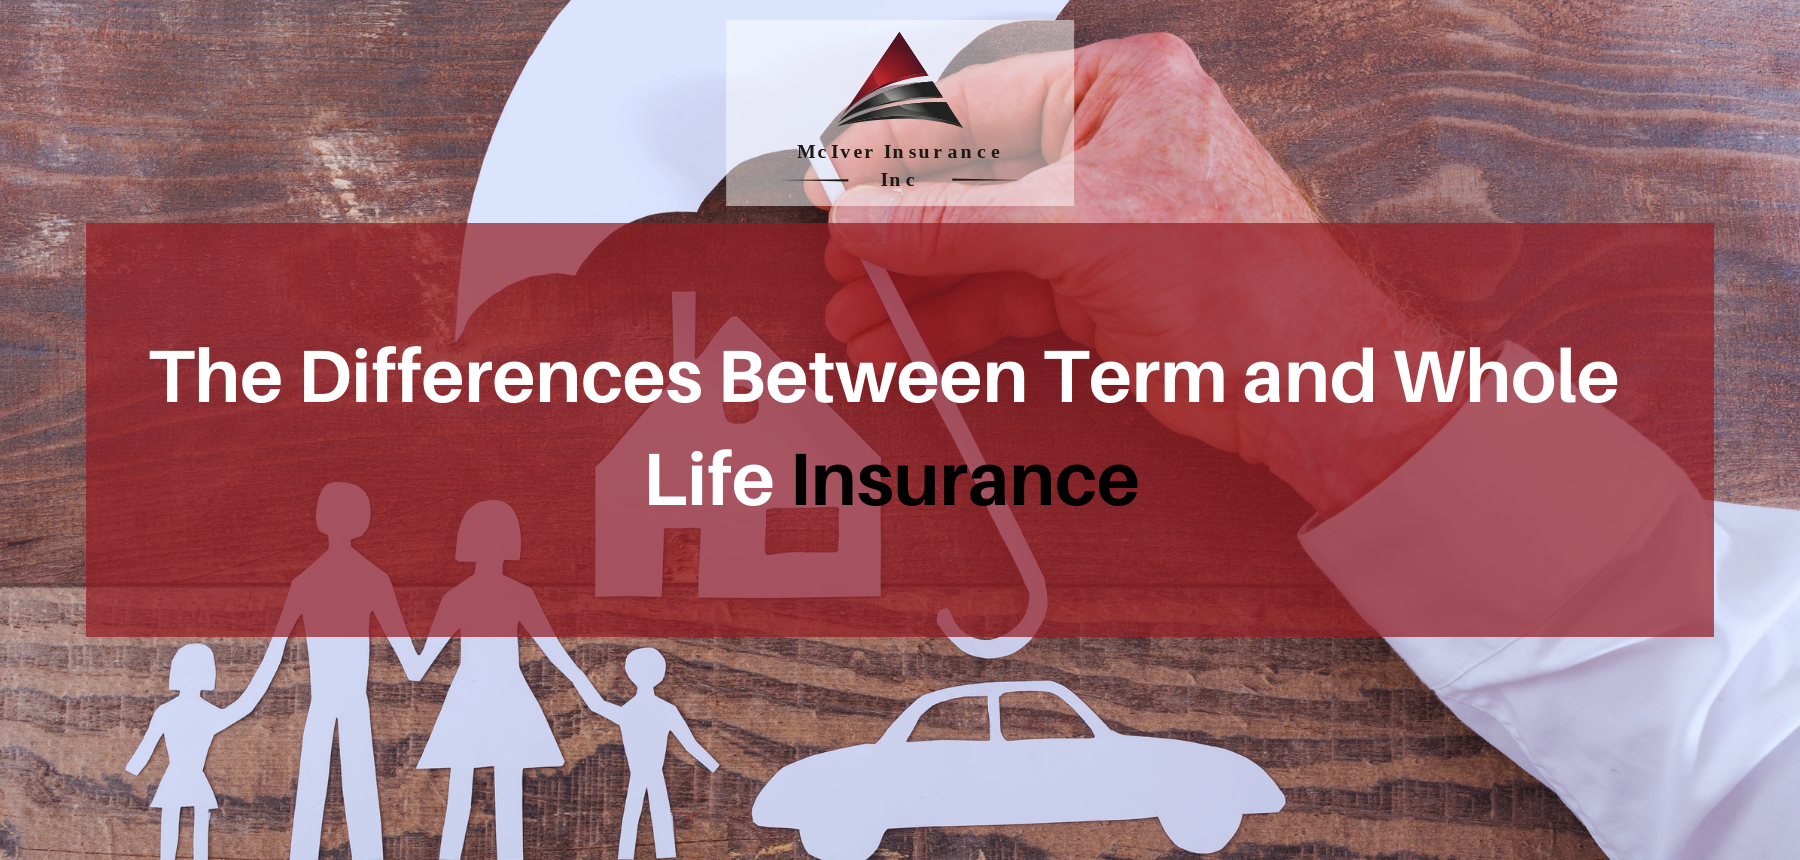 The Differences Between Term and Whole Life Insurance